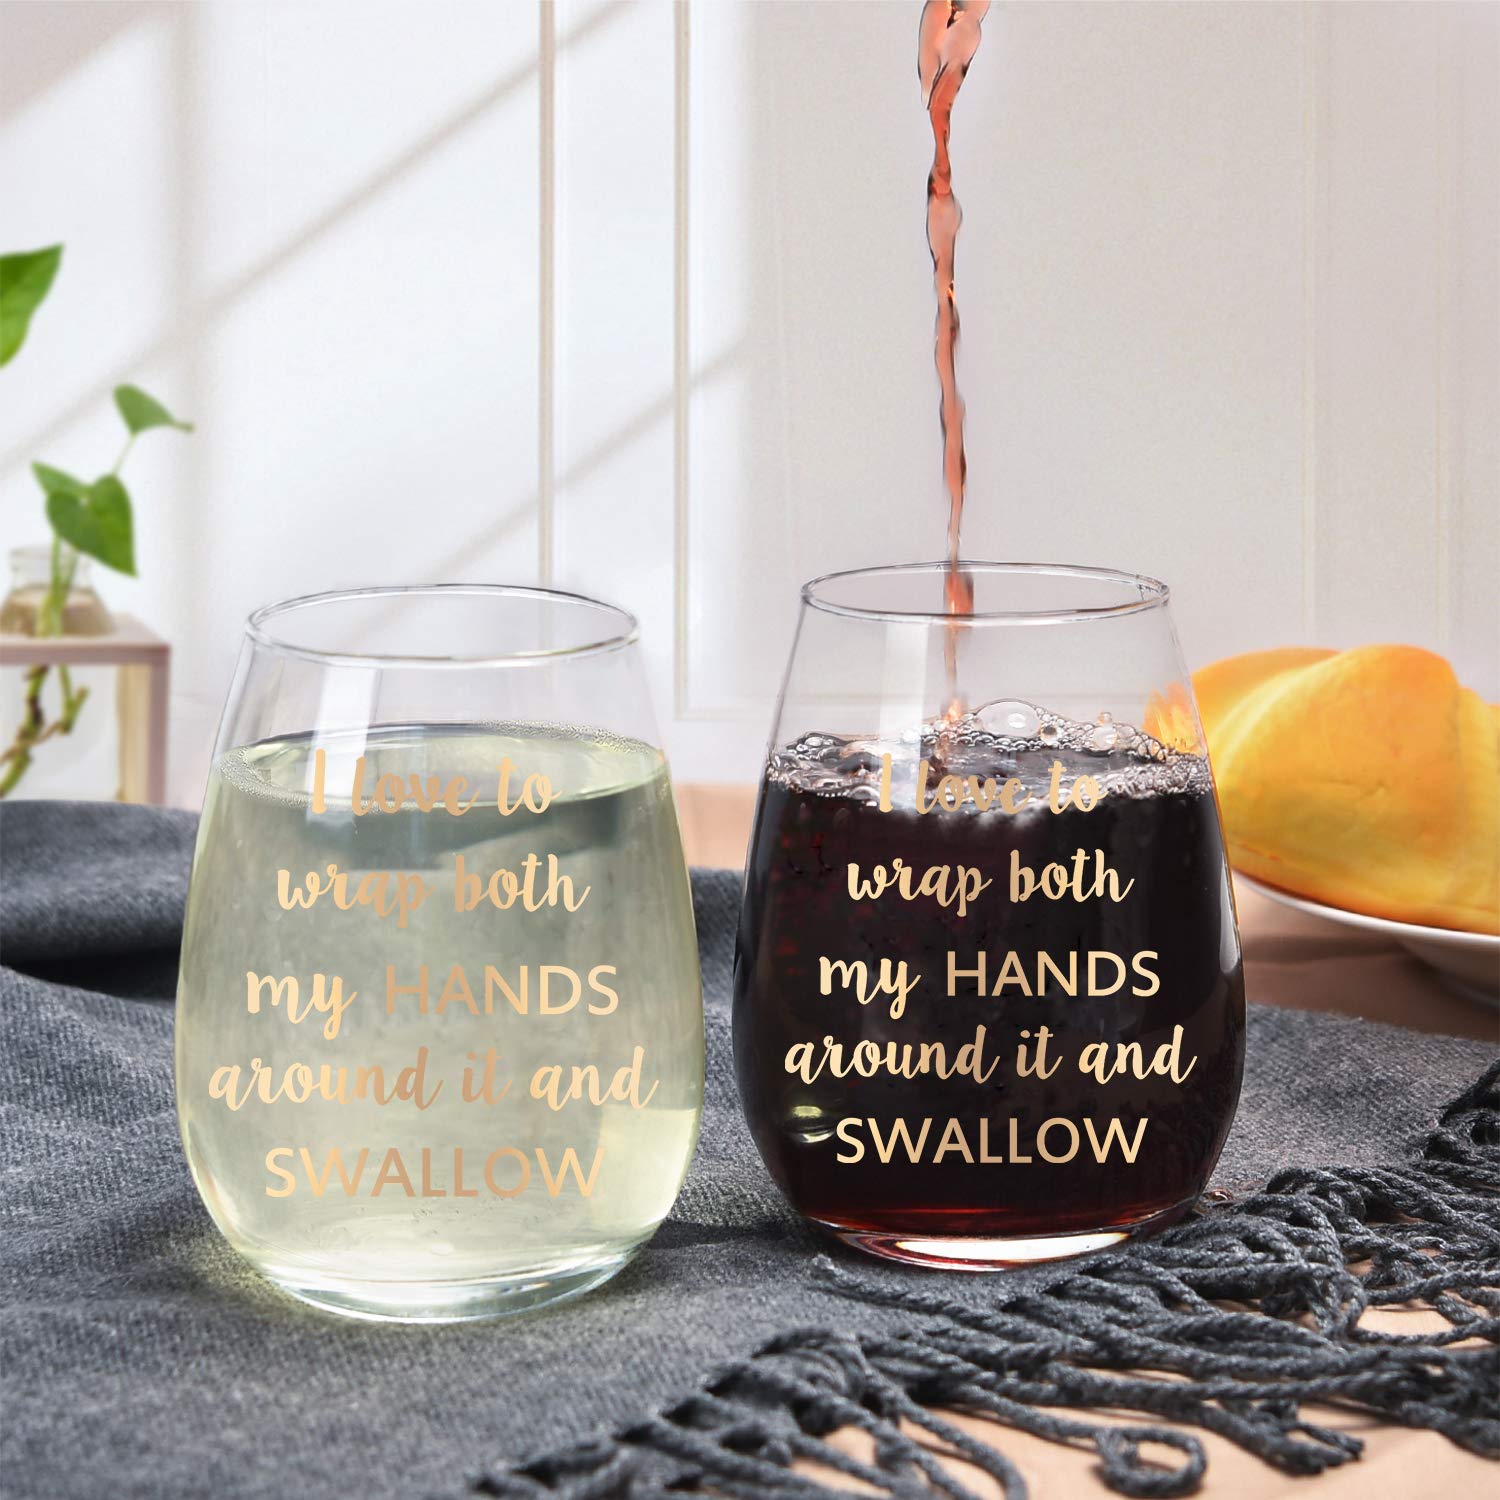 I Love to Wrap Both My Hands Around It and Swallow Stemless Wine Glass Set with Wine Socks and Bottle Opener for Women Friend Wife Girlfriend Her, Gag Gift for Bachelorette Party Birthday, 15 Oz